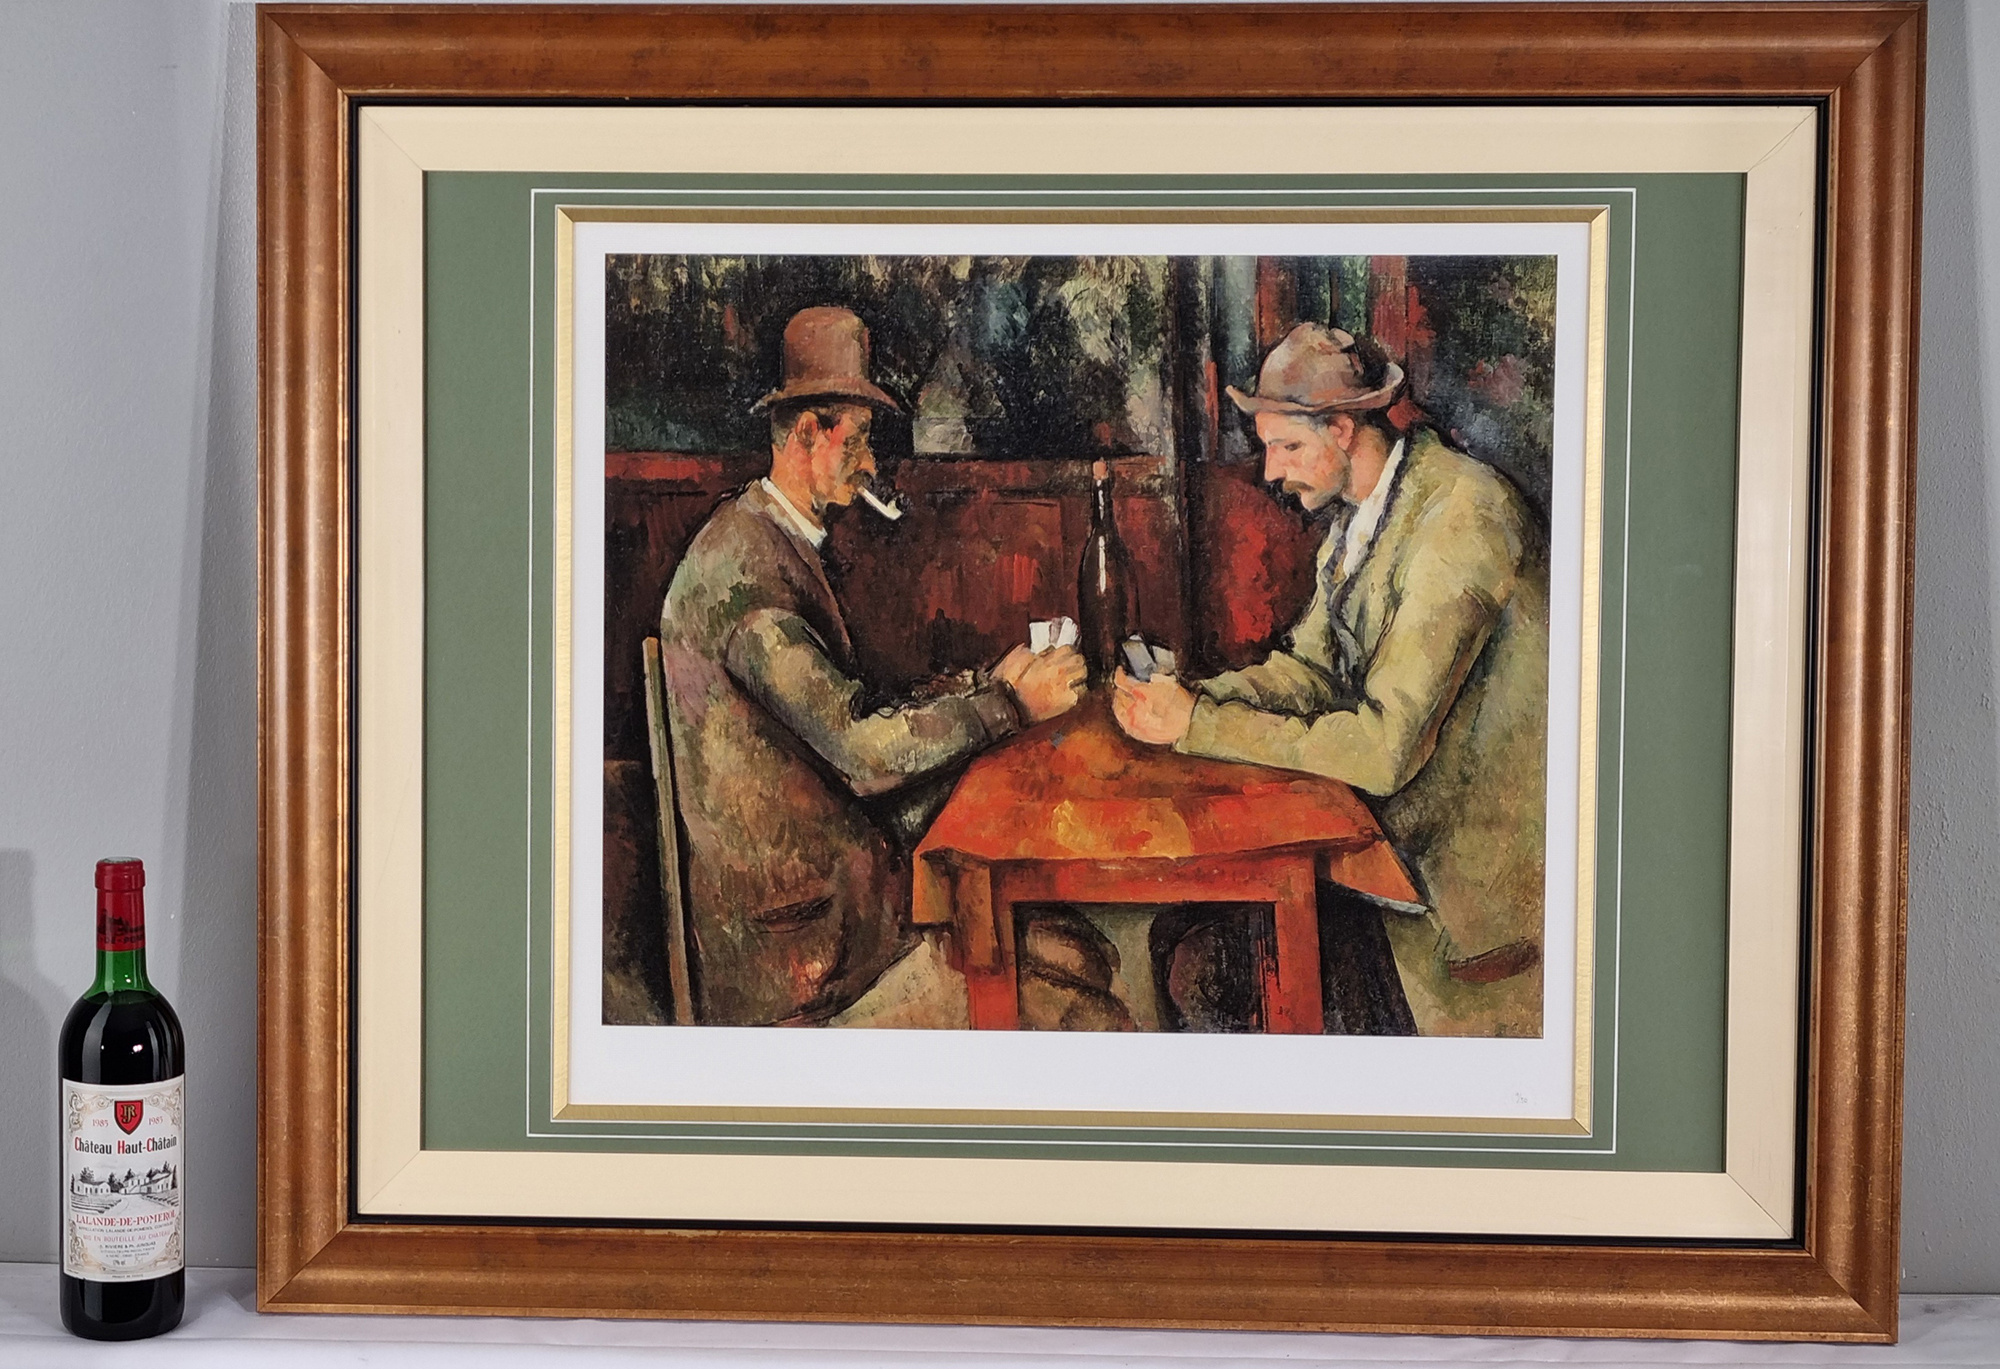 Limited Edition ""The Card Players"" by Paul Cezanne - Image 2 of 10